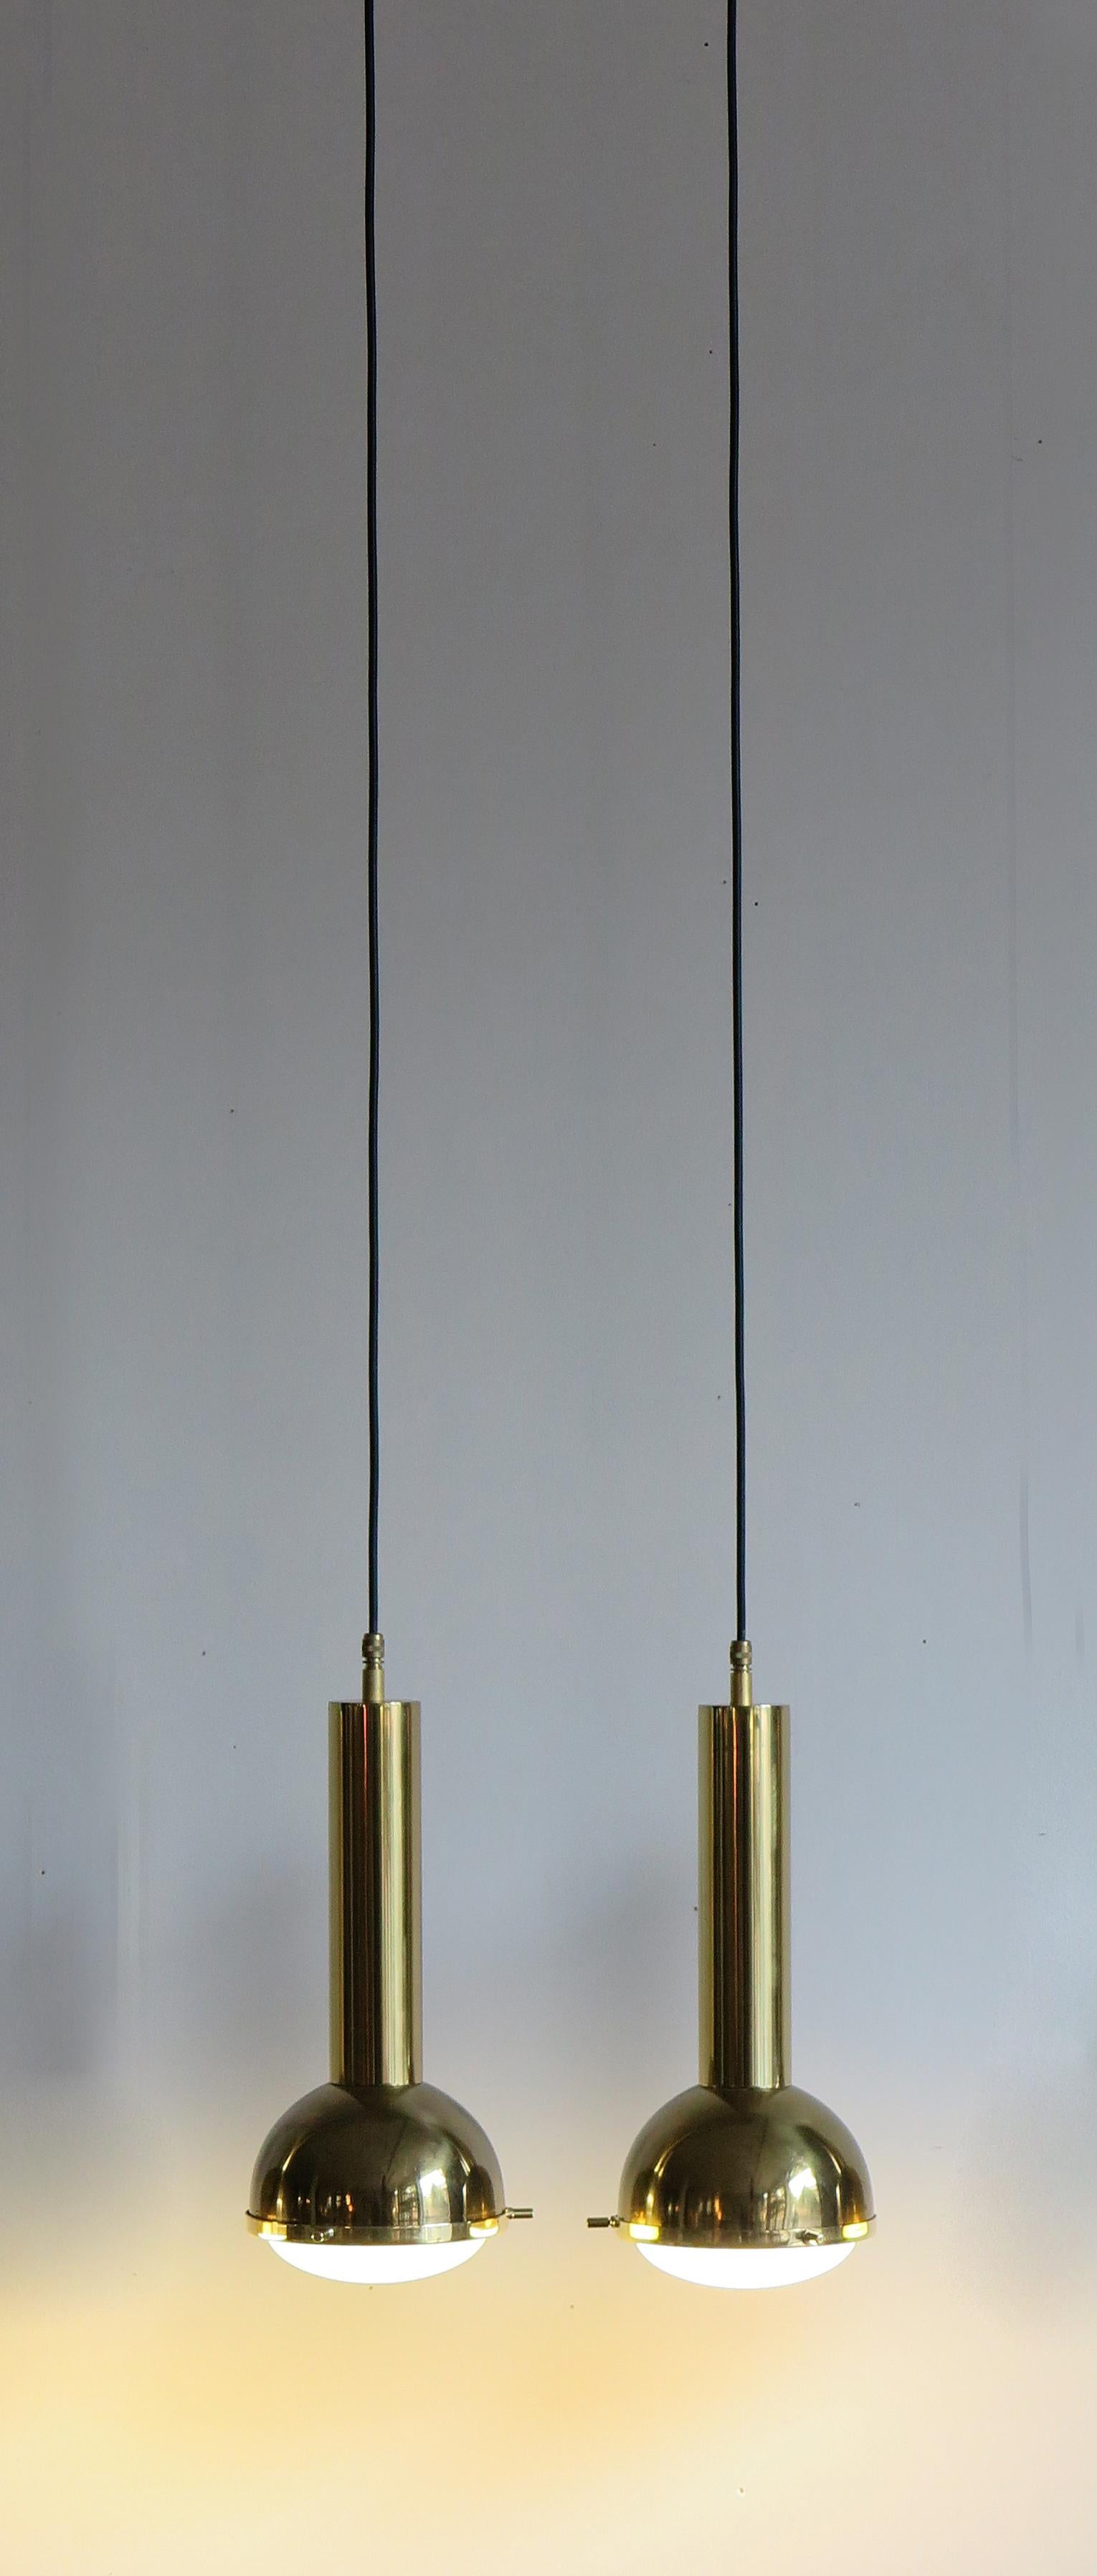 A set of Italian brass and glass pendant lamps produced by Galassia, 1950s

Please note that the lamps are original of the period and this shows normal signs of age and use.